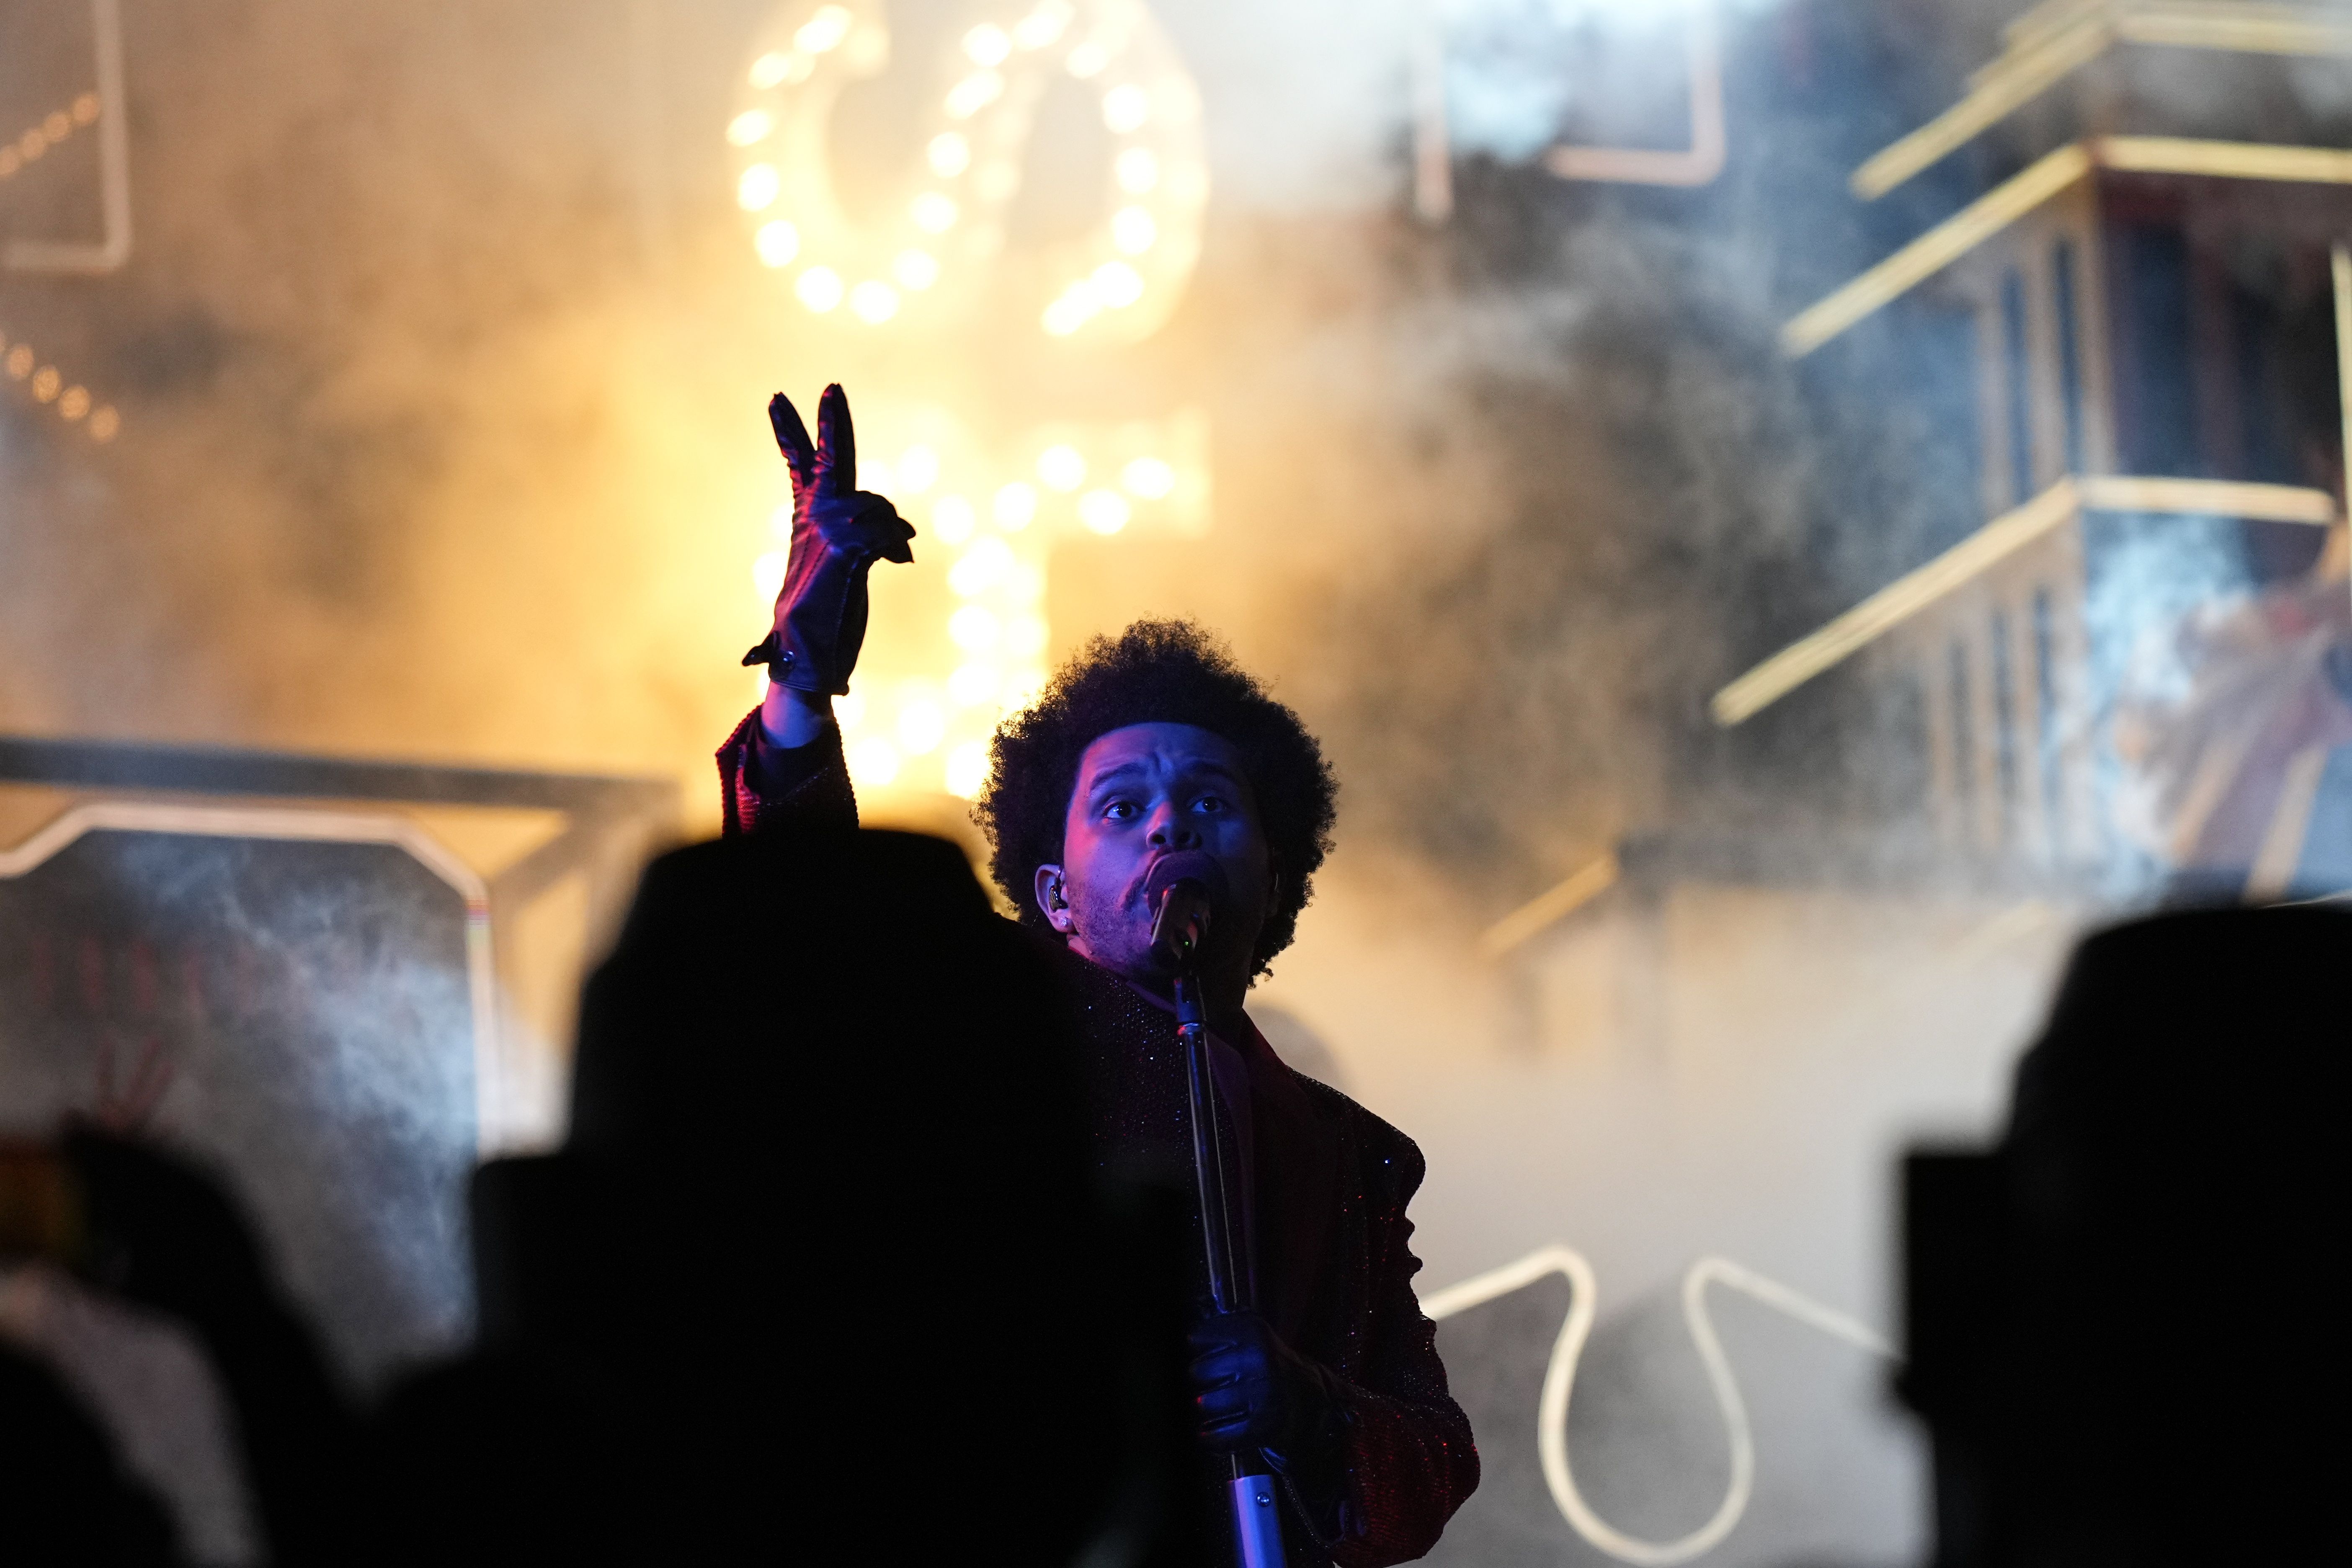 Why the Weeknd Won't Get Paid for Super Bowl Halftime Show